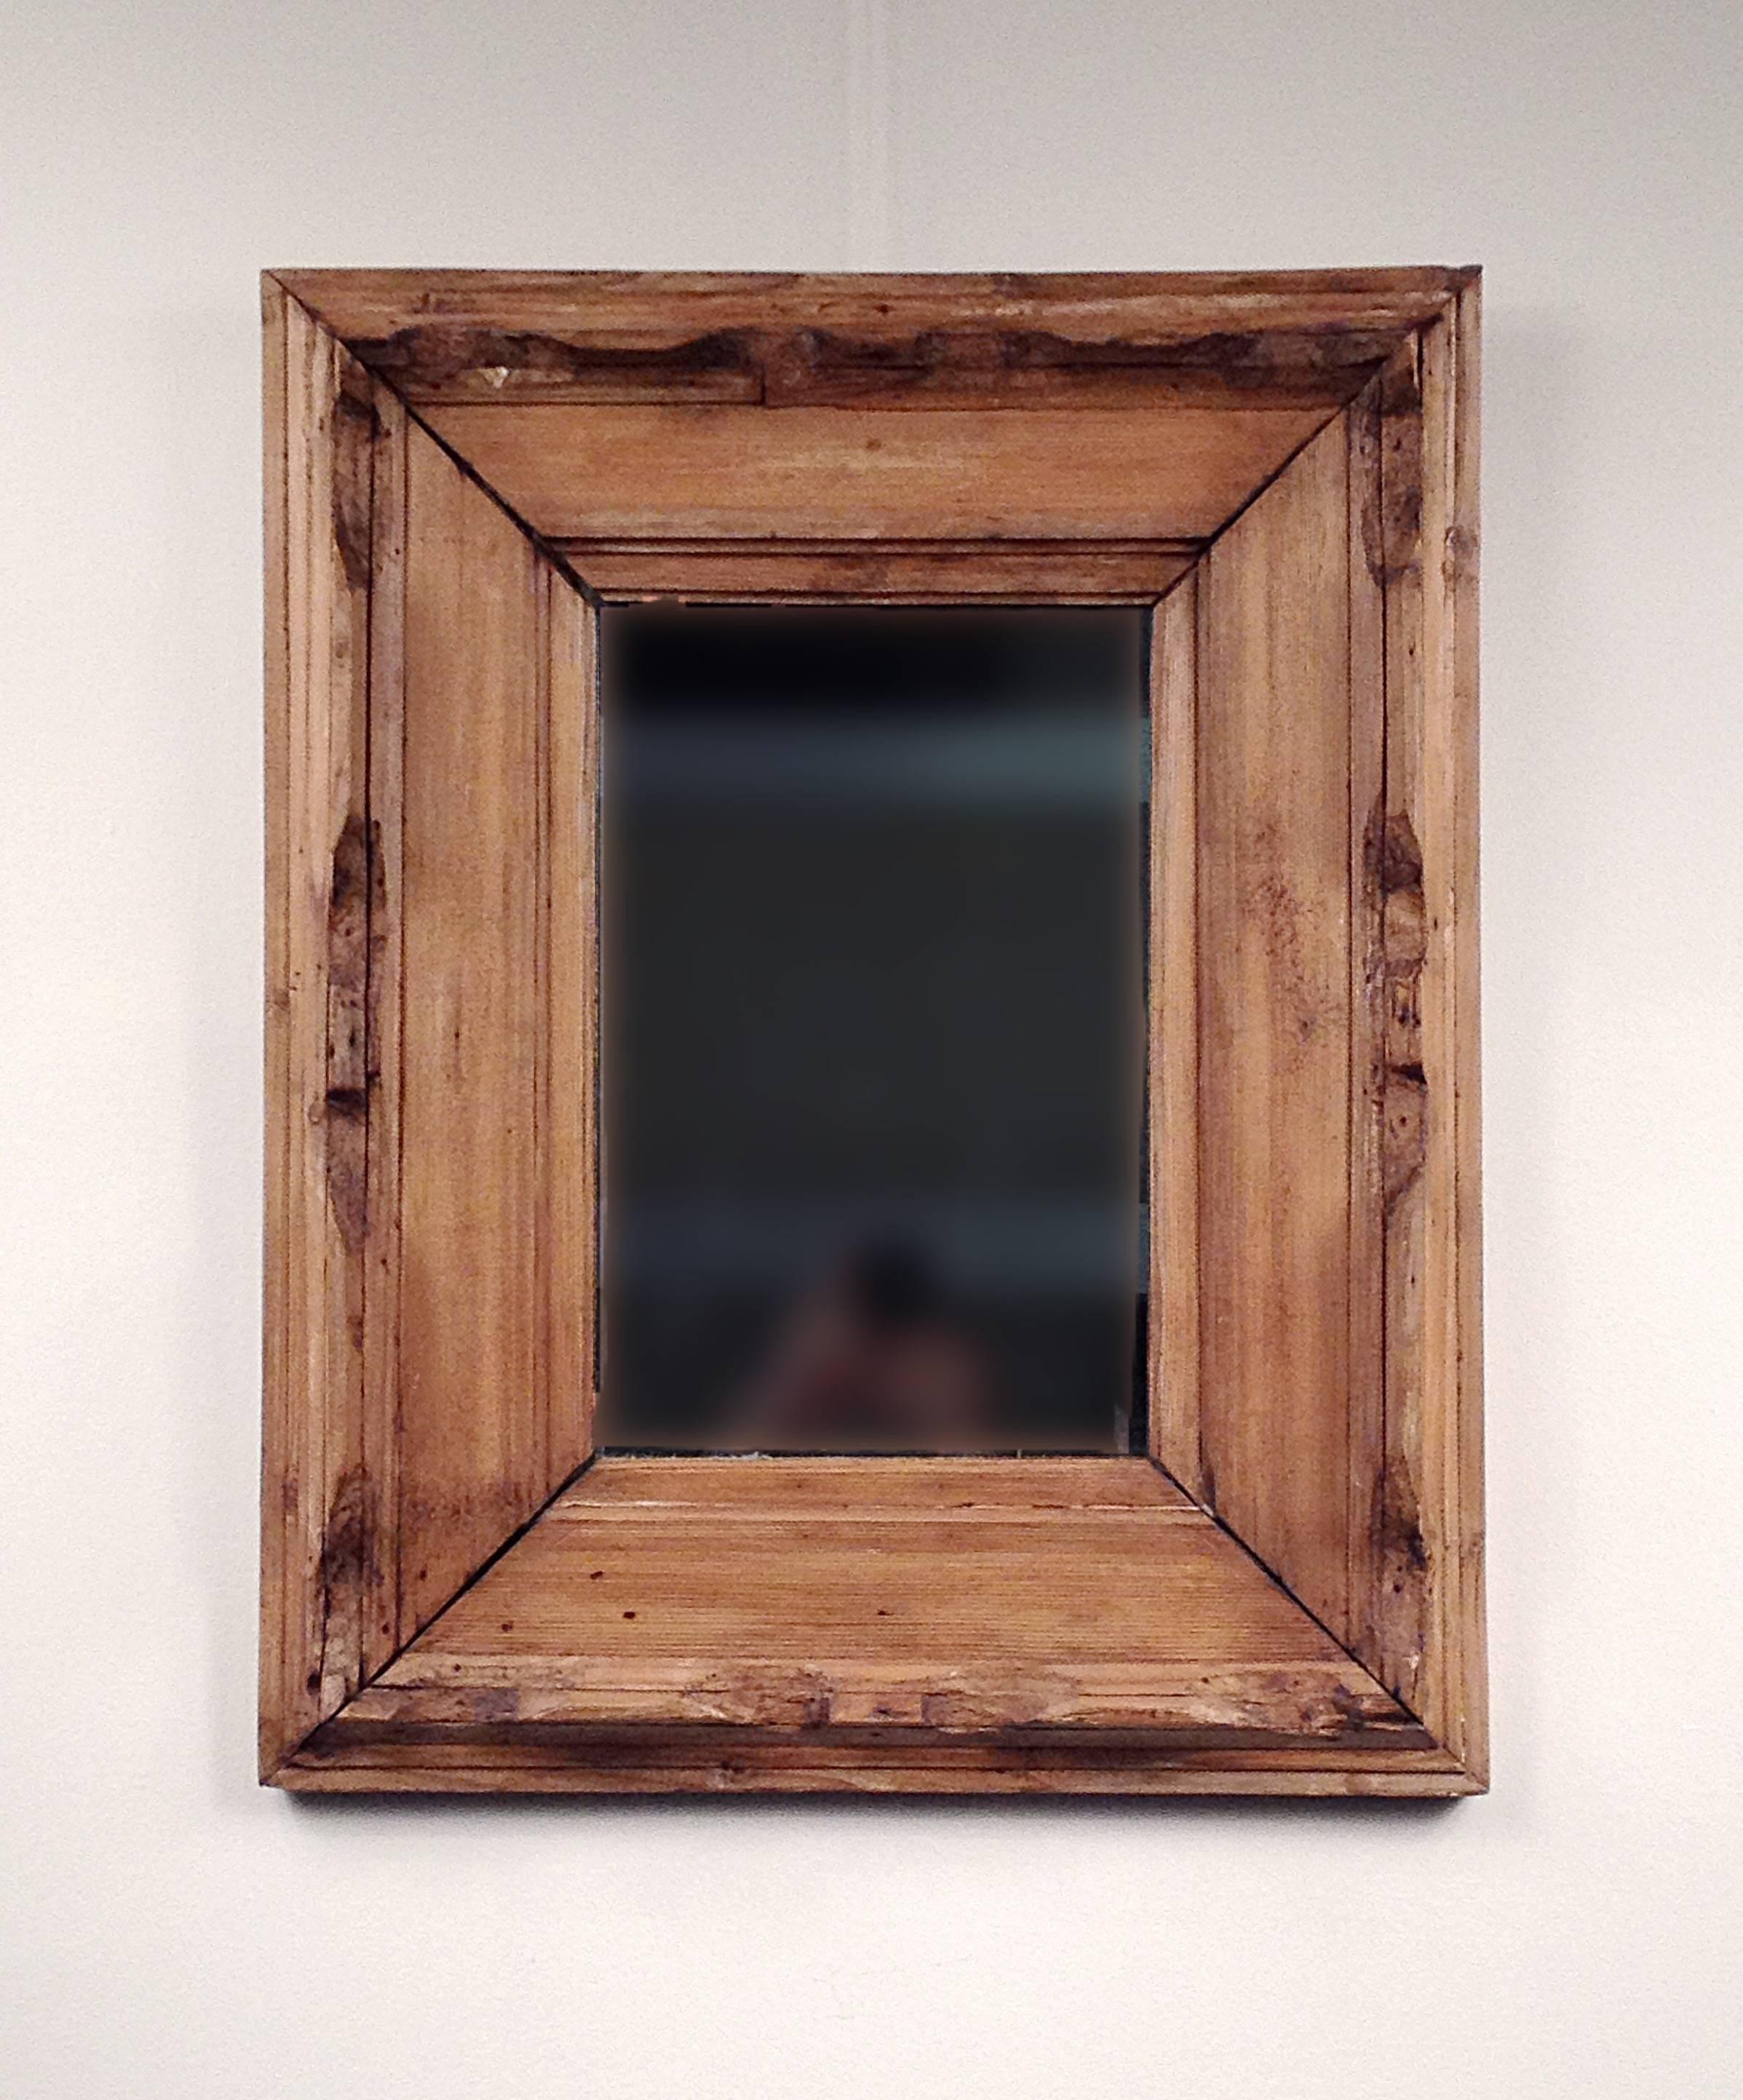 Rare carved mirror from Sag Harbor NY. Original plate, beautifully oxidized,
late 18th century.

